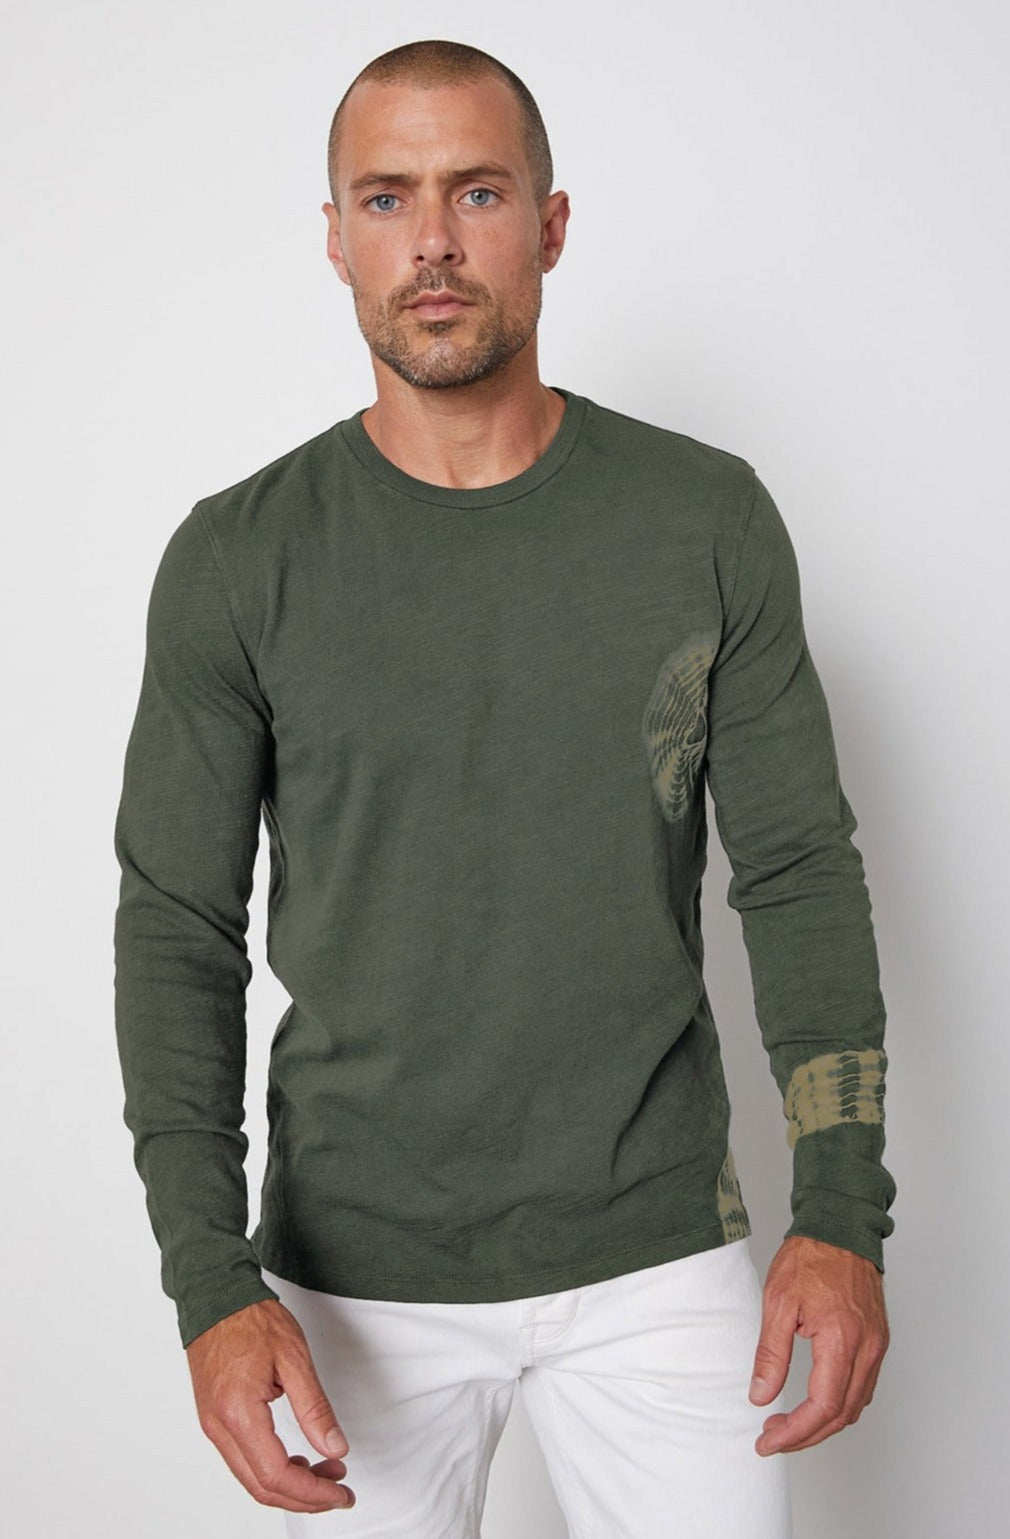   Caleb tee in olive front 